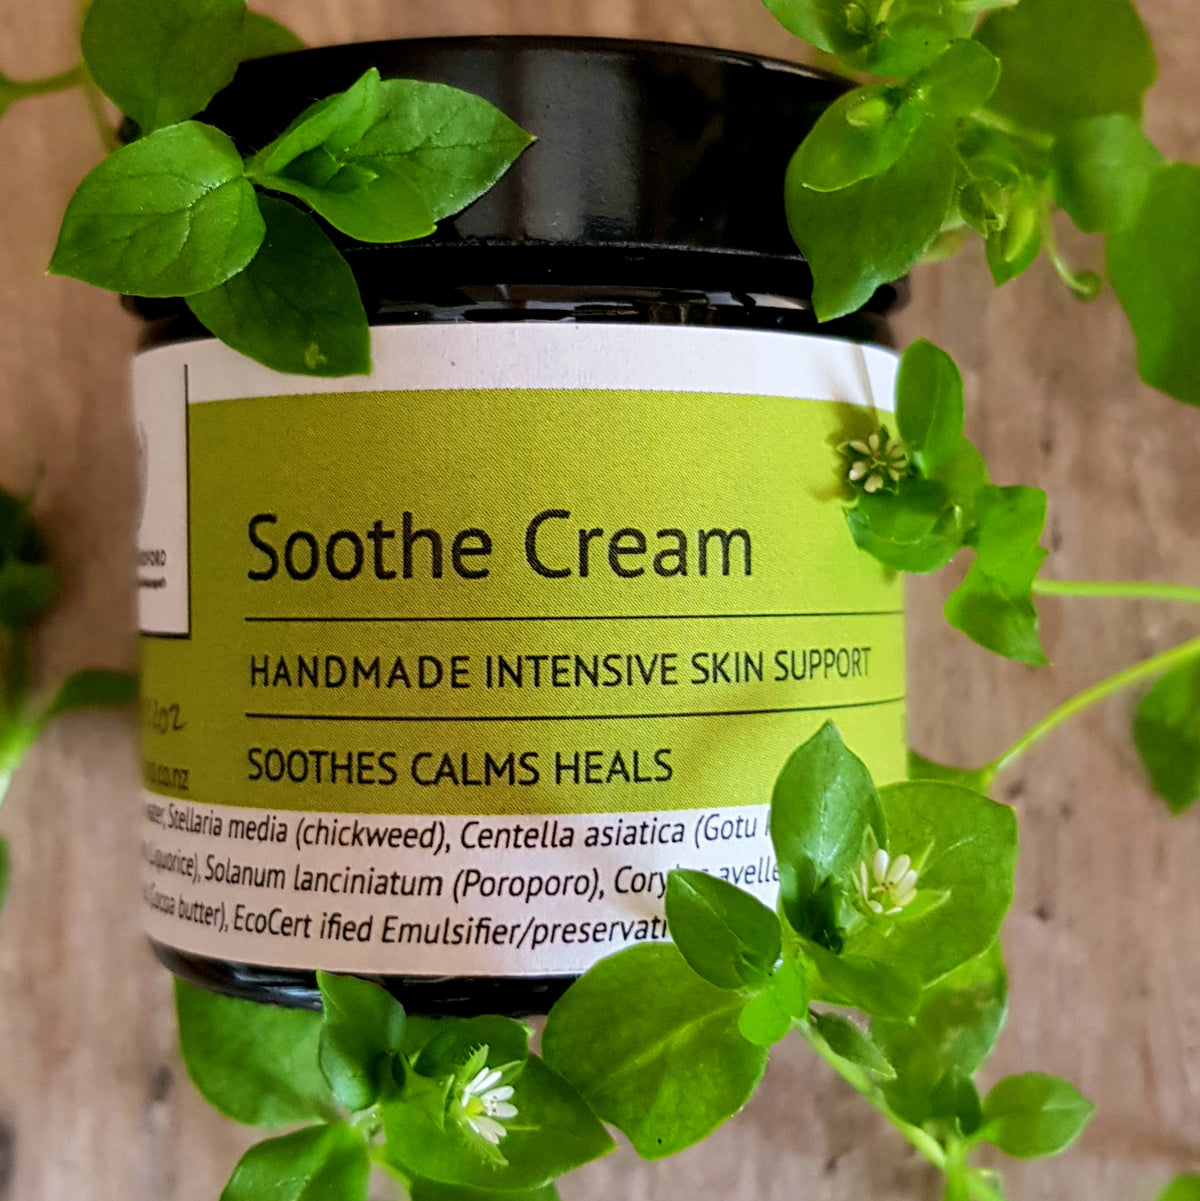 Soothe: Cooling cream for Itchy, Irritated skin